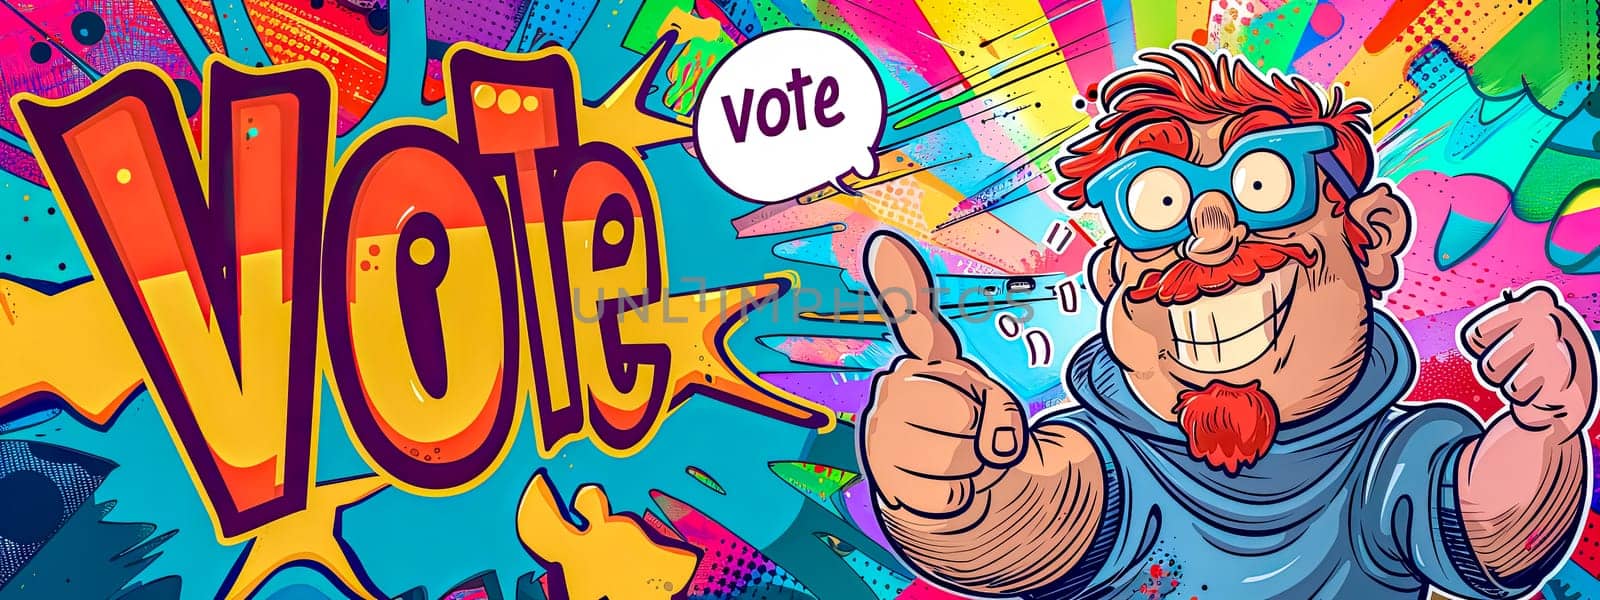 Colorful cartoon encouraging voting participation by Edophoto